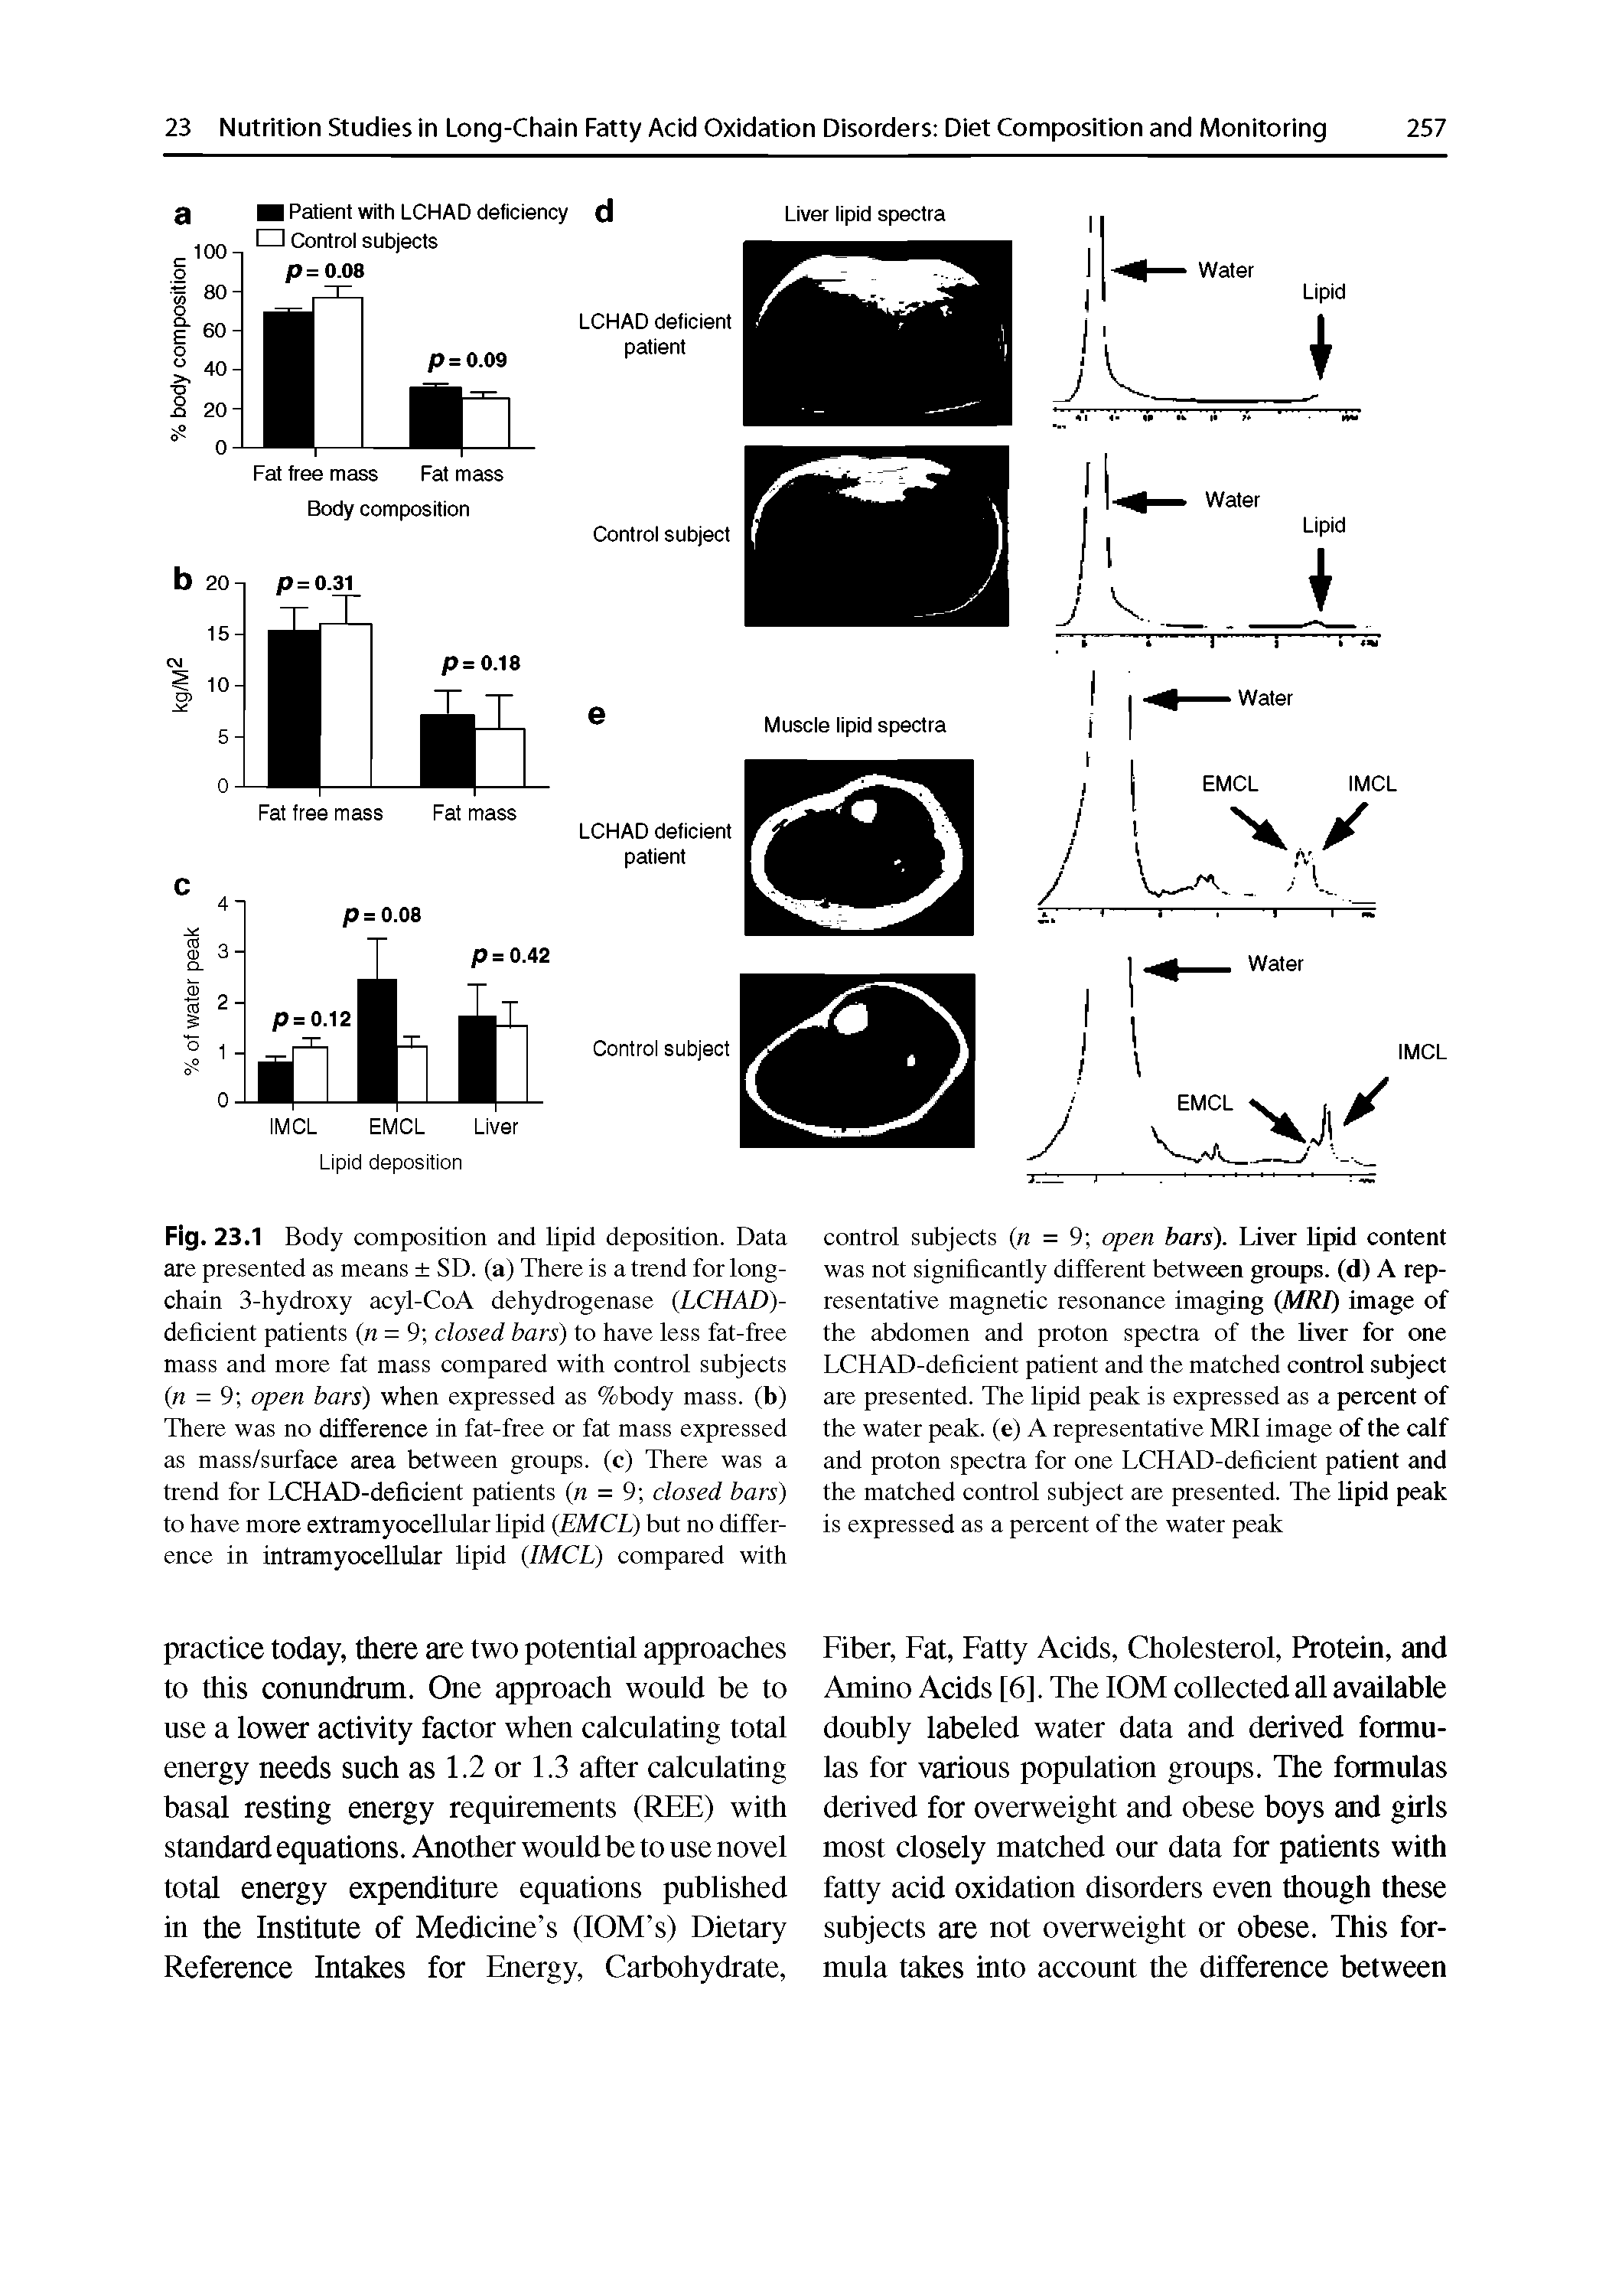 Fig. 23.1 Body composition and lipid deposition. Data are presented as means SD. (a) There is a trend for long-chain 3-hydroxy acyl-CoA dehydrogenase (LCHAD)-deficient patients (n = 9 closed bars) to have less fat-free mass and more fat mass compared with control subjects (n = 9 open bars) when expressed as %body mass, (b) There was no difference in fat-free or fat mass expressed as mass/surface area between groups, (c) There was a trend for LCHAD-deficient patients (n = 9 closed bars) to have more extramyocellular Upid EMCL) but no difference in intramyocellular lipid IMCL) compared with...